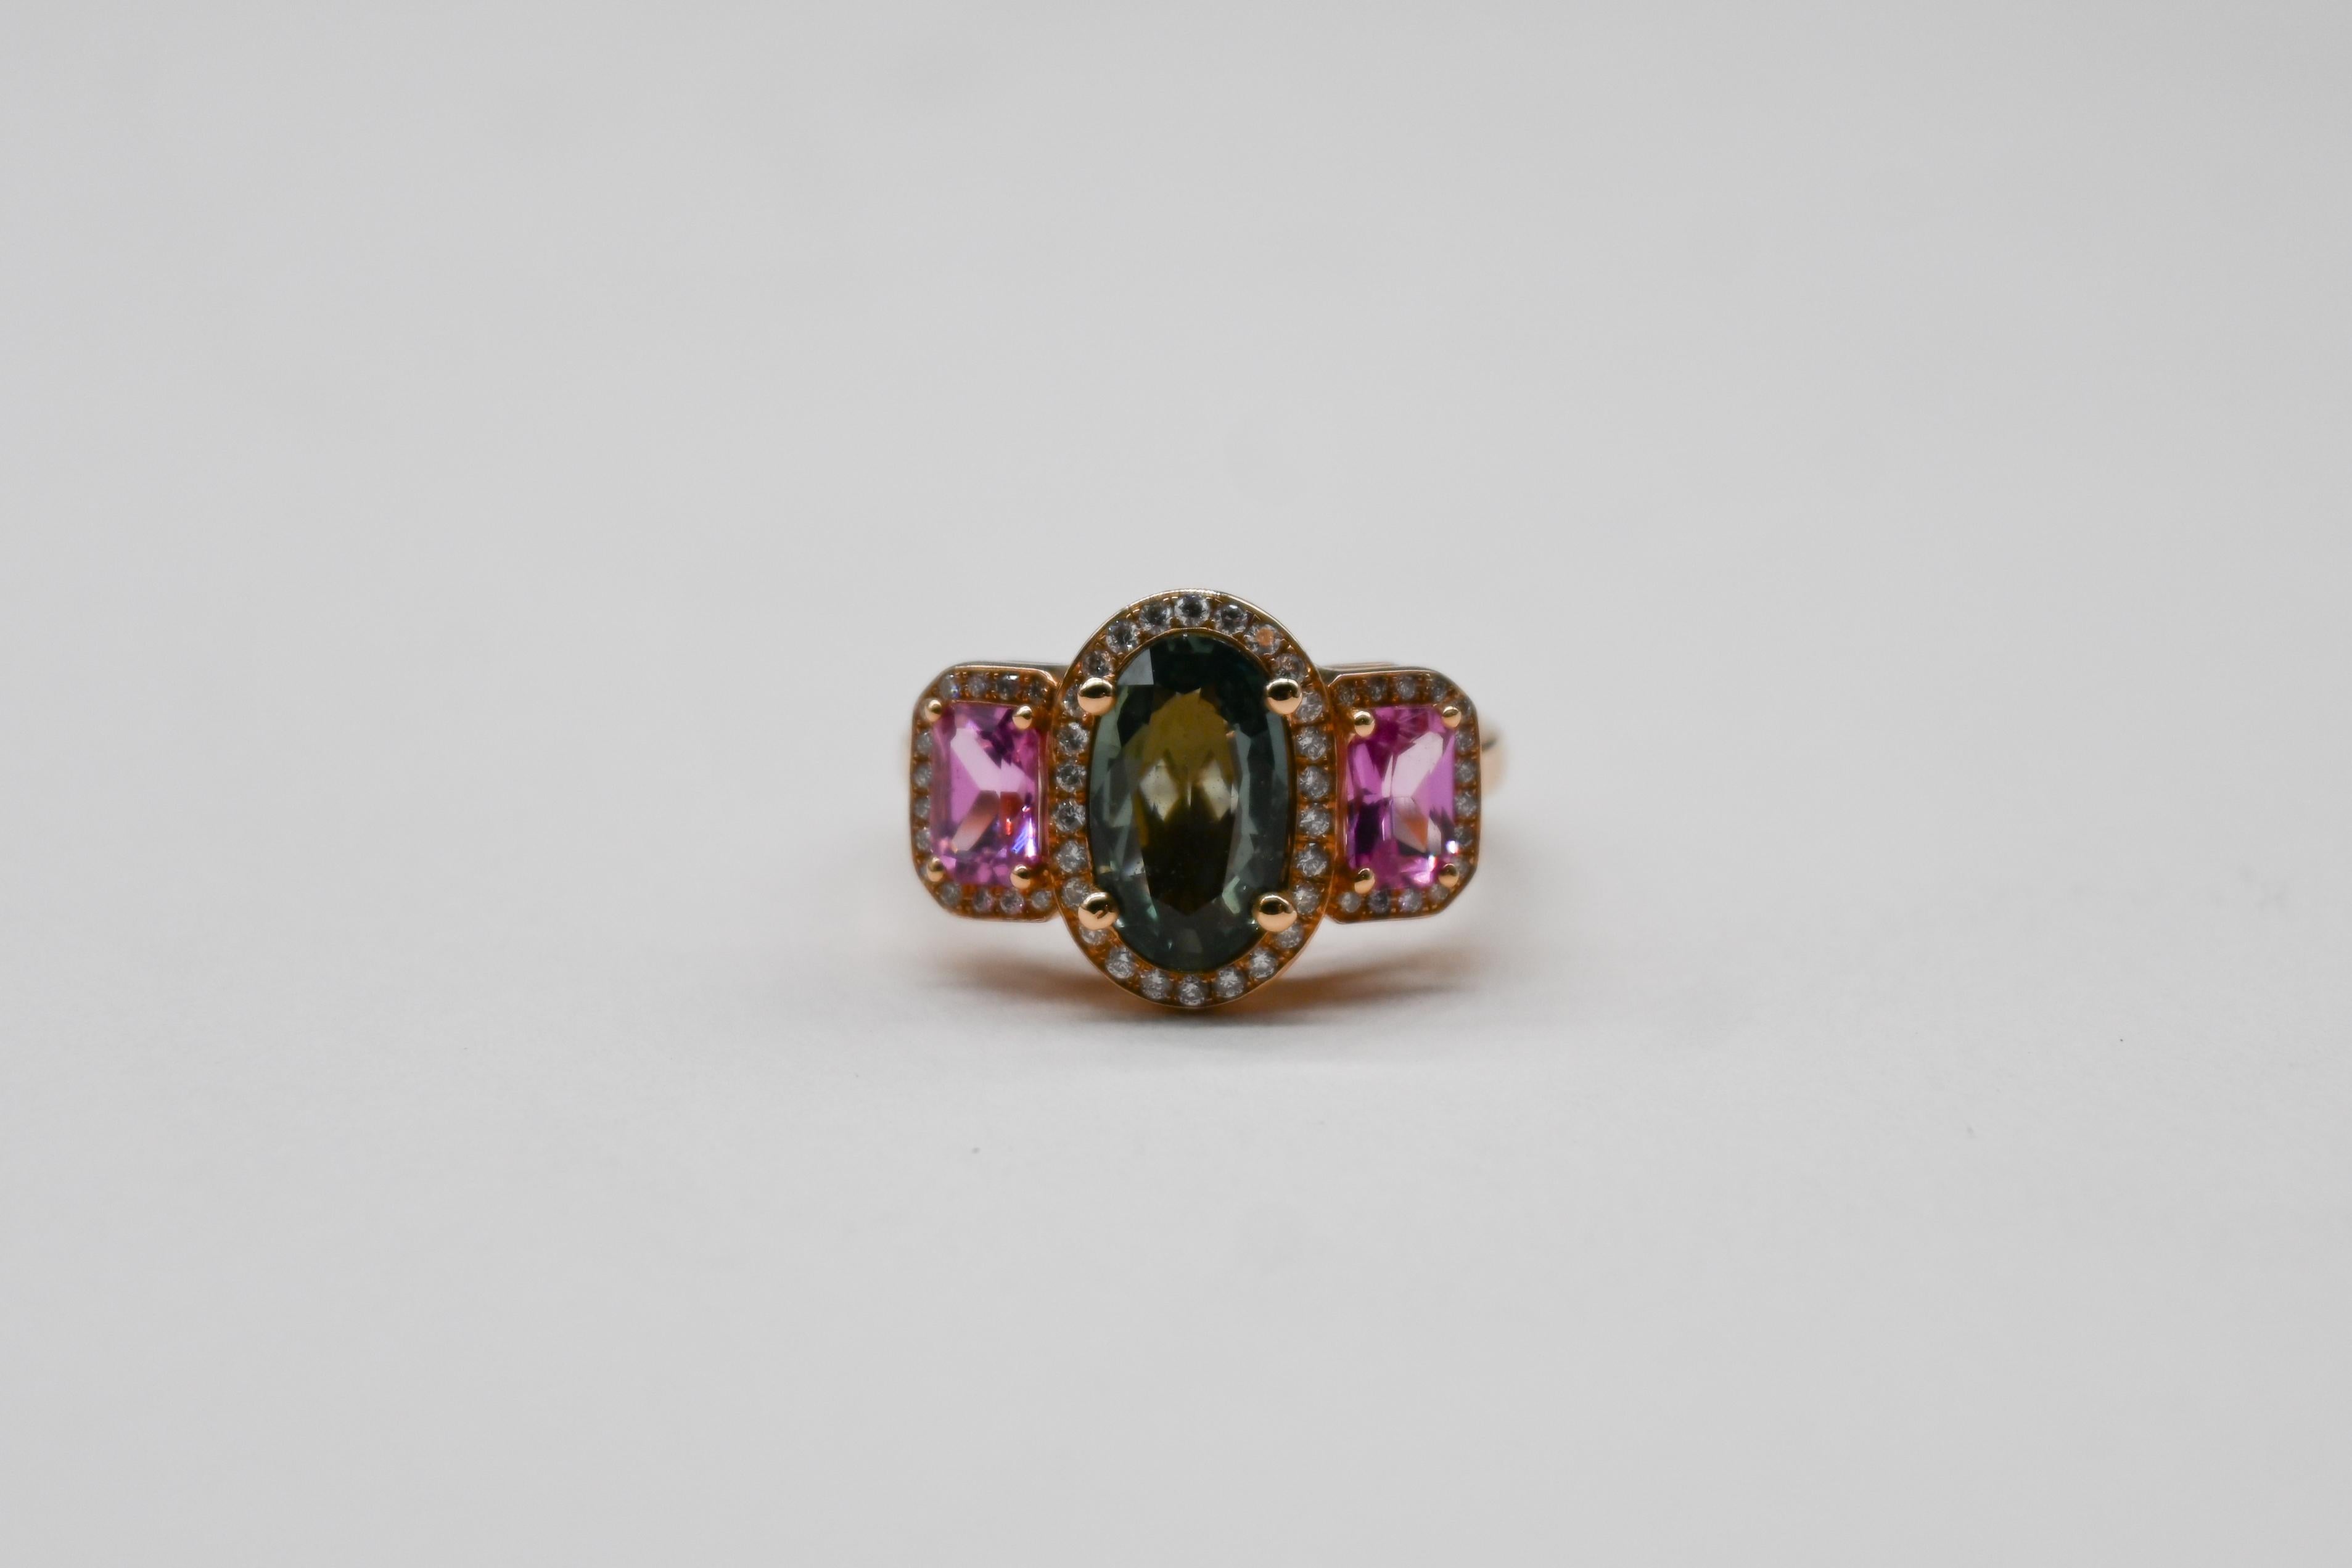 Discover our 18-carat rose gold ring, adorned with three eye-catching gemstones. In the center, a 1.90-carat oval-cut green sapphire. On either side, two radiant-cut pink sapphires, each 1.10 carats, add a touch of color and harmony on this